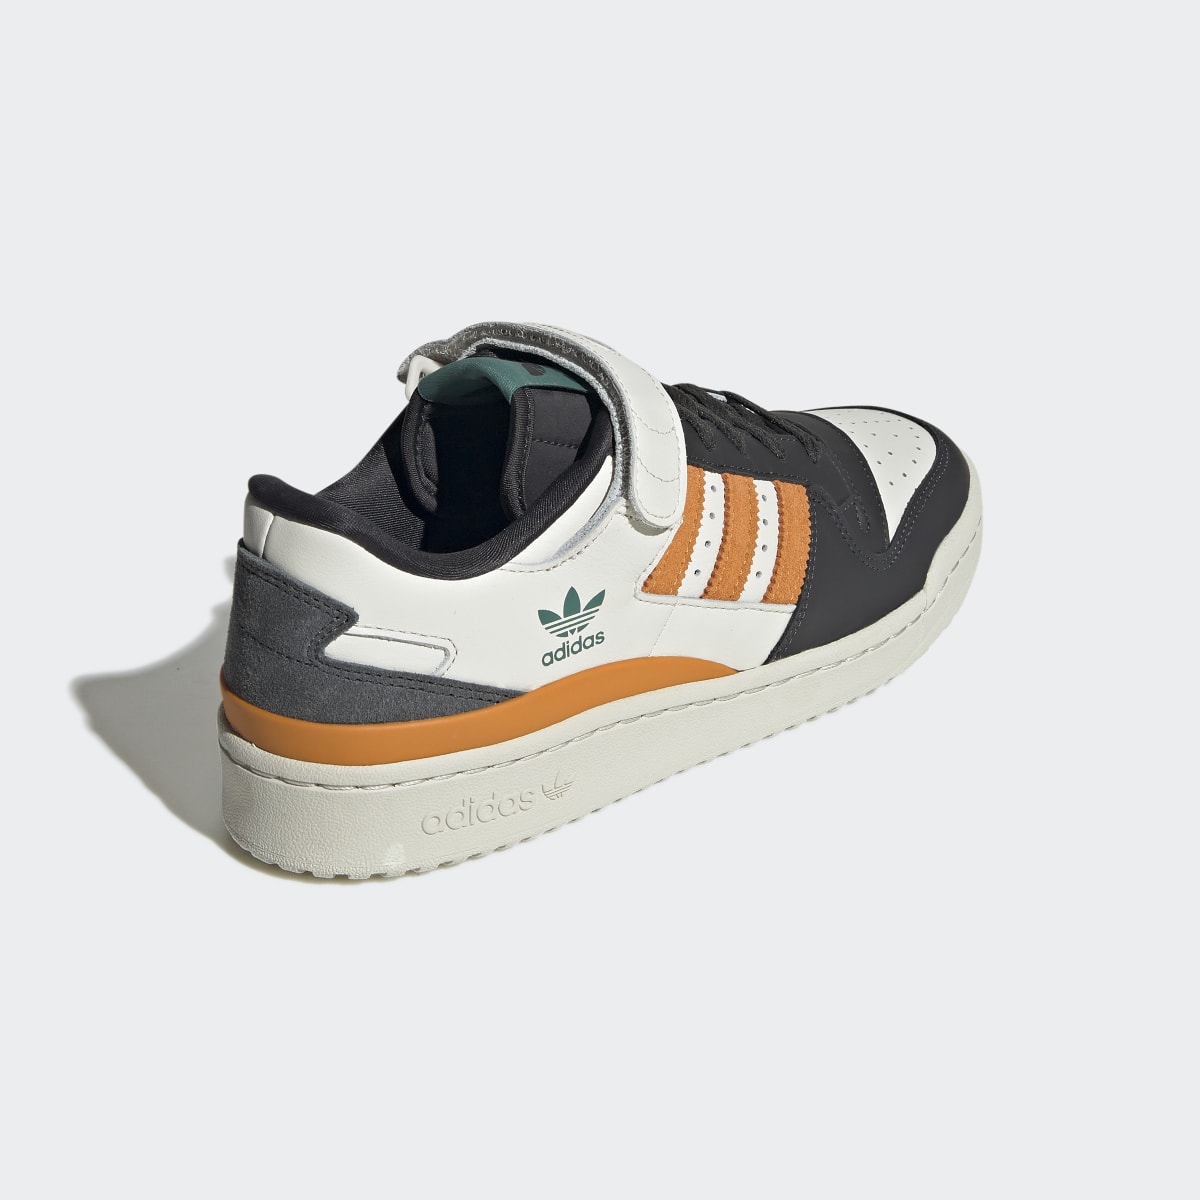 Adidas Forum 84 Low Shoes. 6